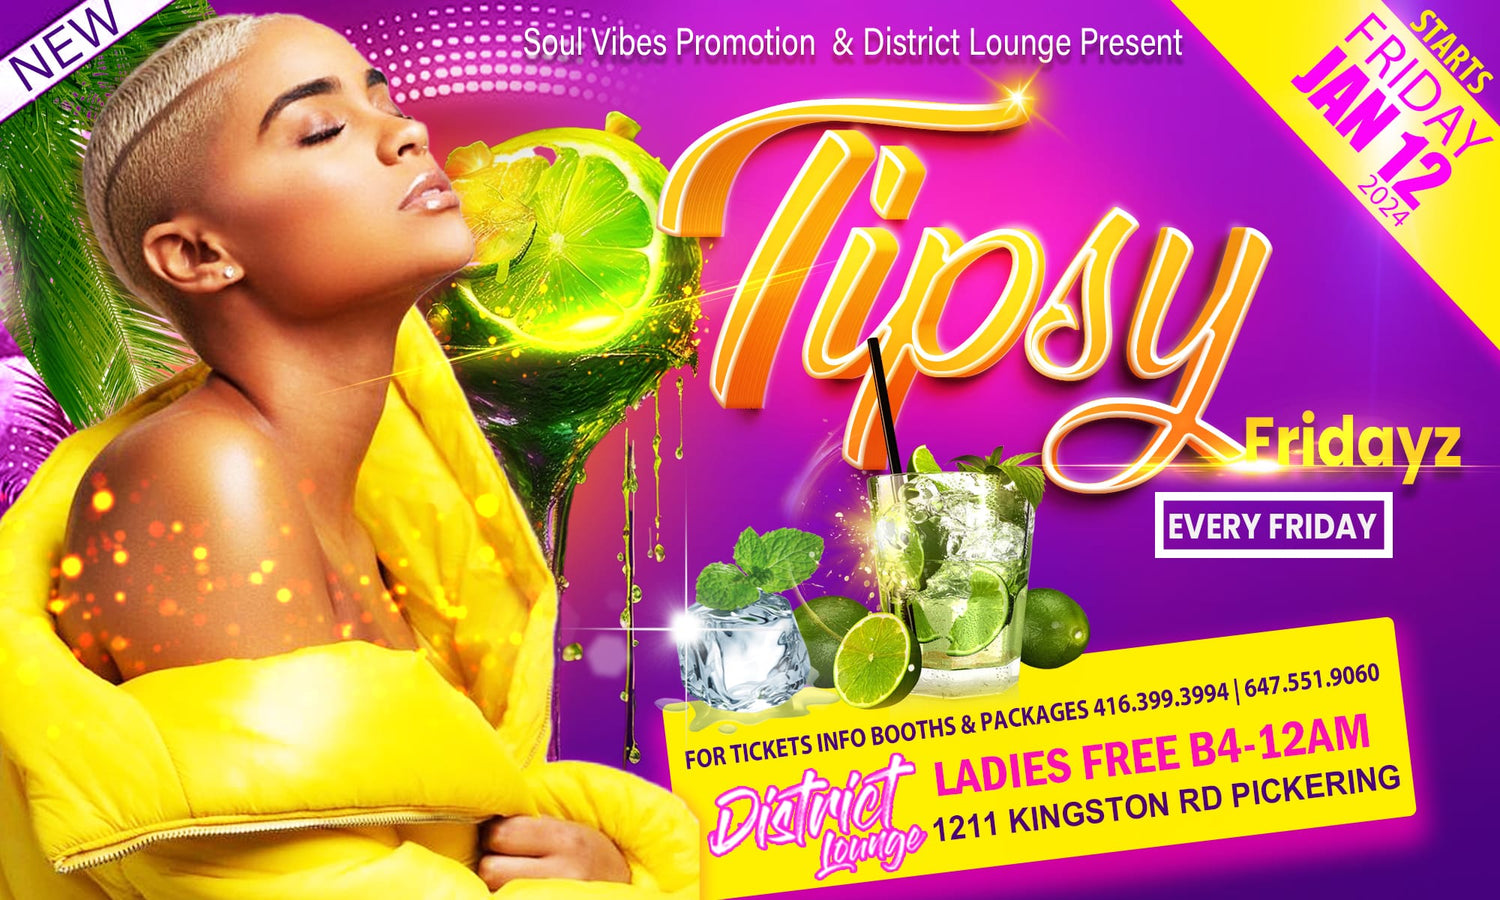 Tipsy Fridays District Lounge Soul Vibes